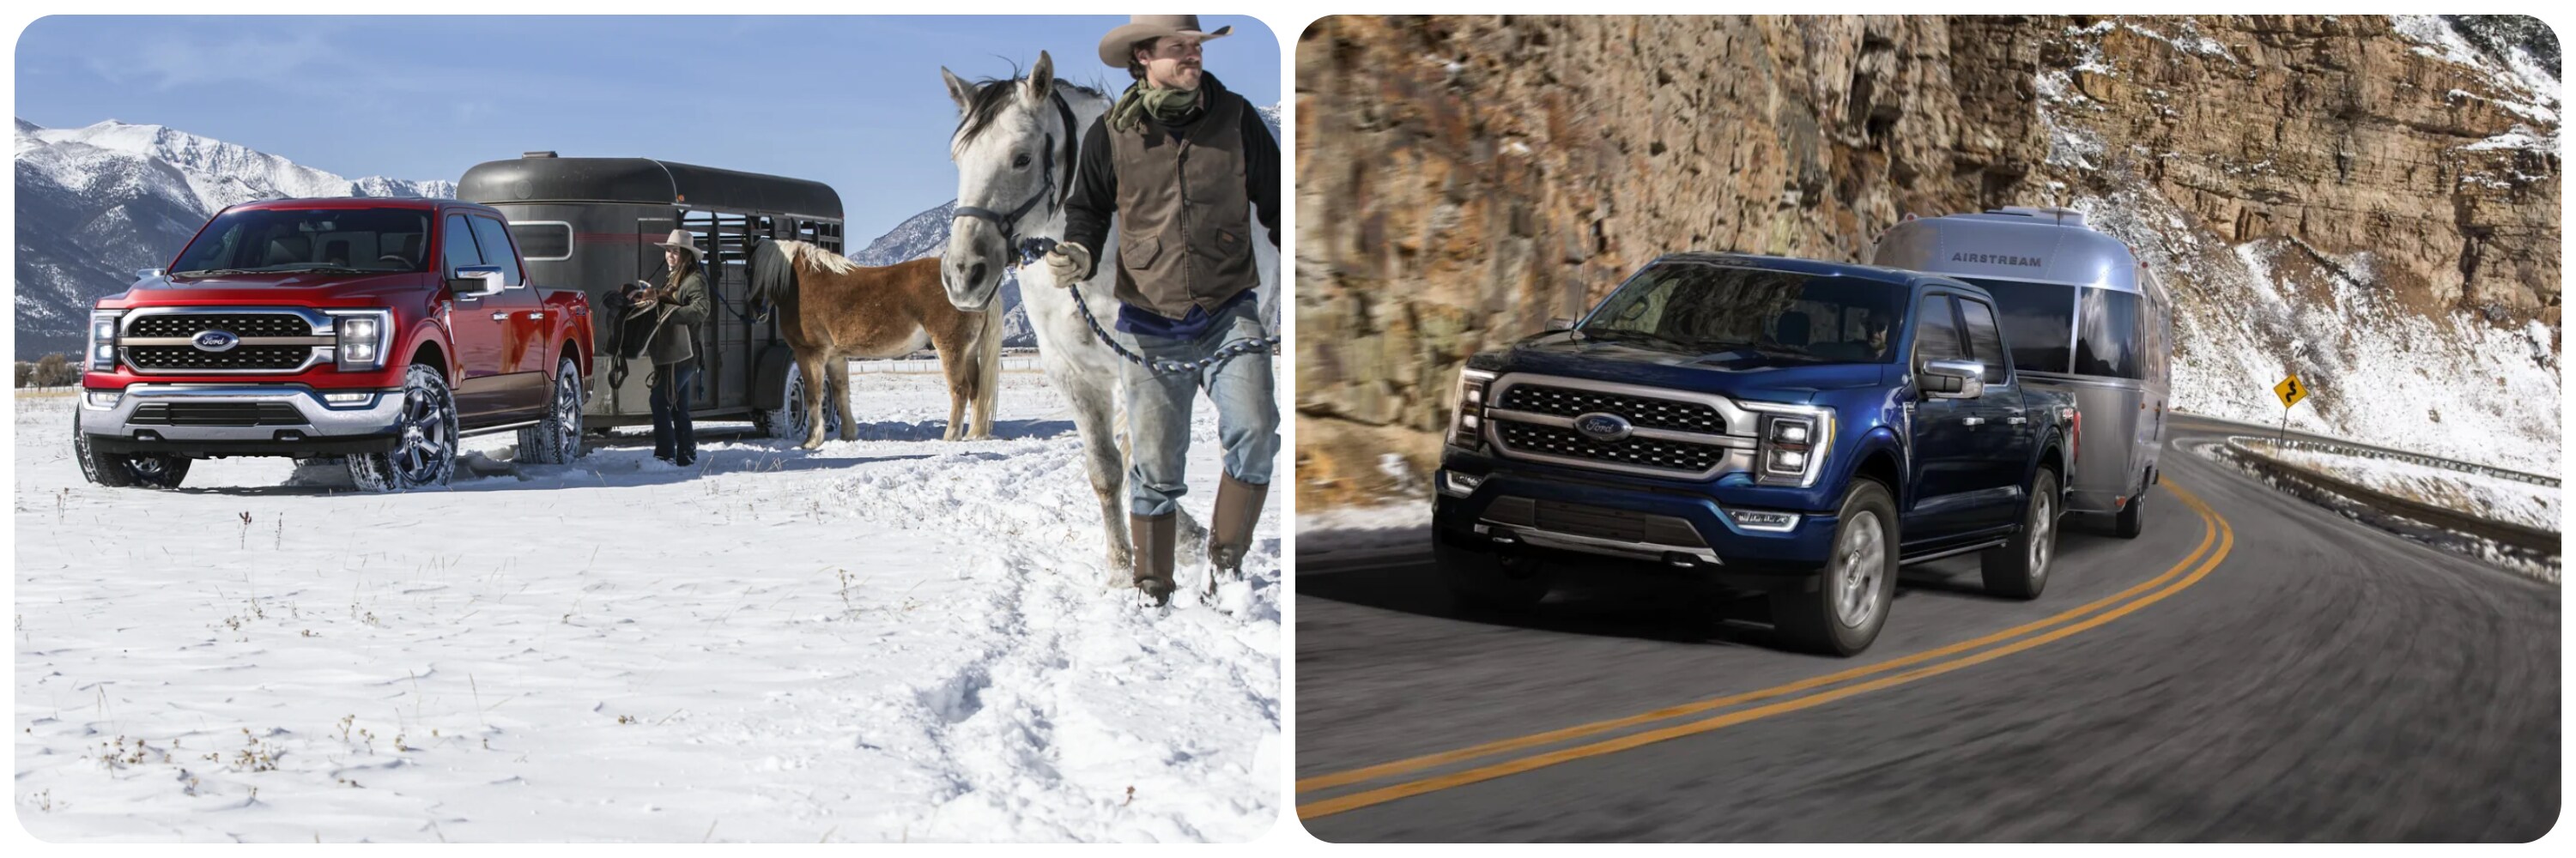 On the left a red 2022 Ford F-150 sits parked in a snowy field as the horse trailer it is towing is unloaded.  On the right a blue 2021 Ford F-150 takes a curvy mountain road while towing an airstream